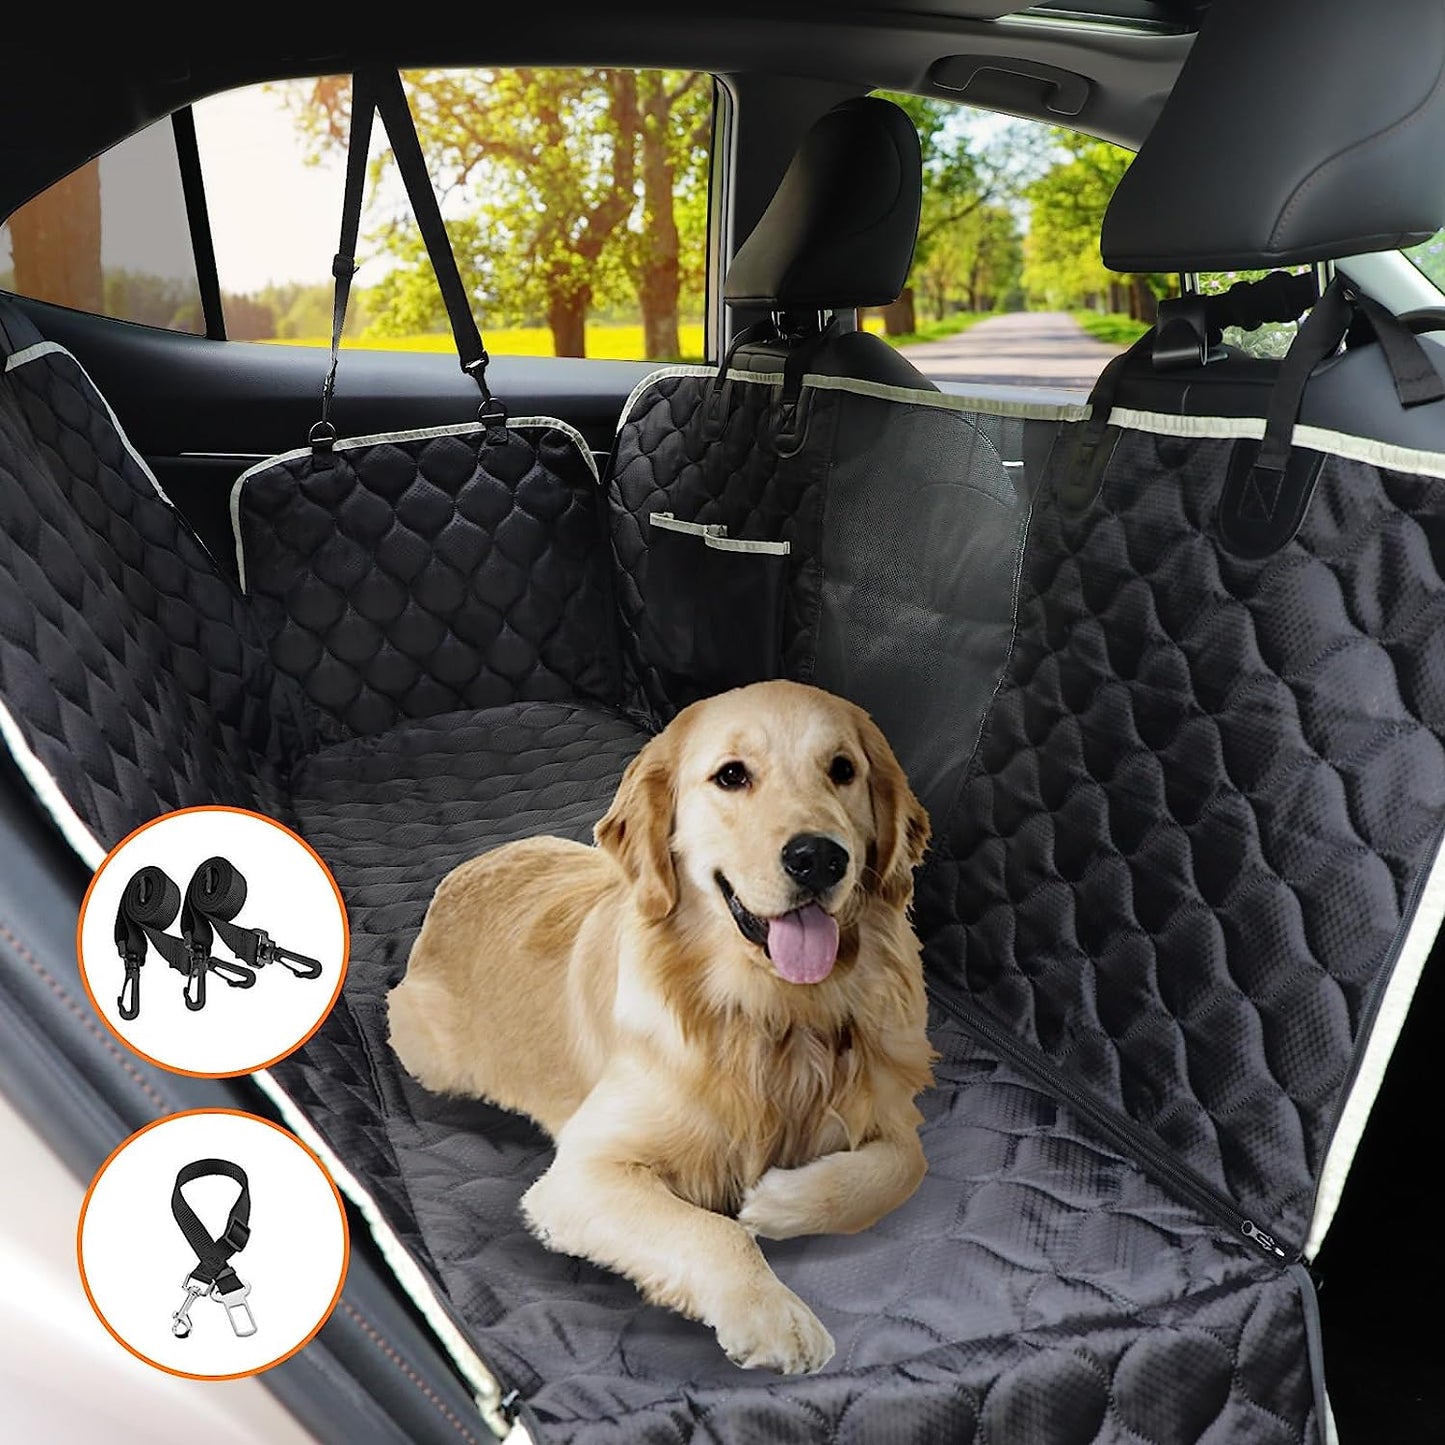 PETICON Dog Car Seat Cover for Back Seat, Waterproof Dog Seat Cover for Cars with Mesh Window, Scratchproof Back Seat Cover for Dogs, Nonslip Dog Hammock for Cars, Trucks, SUVs, Black and Beige